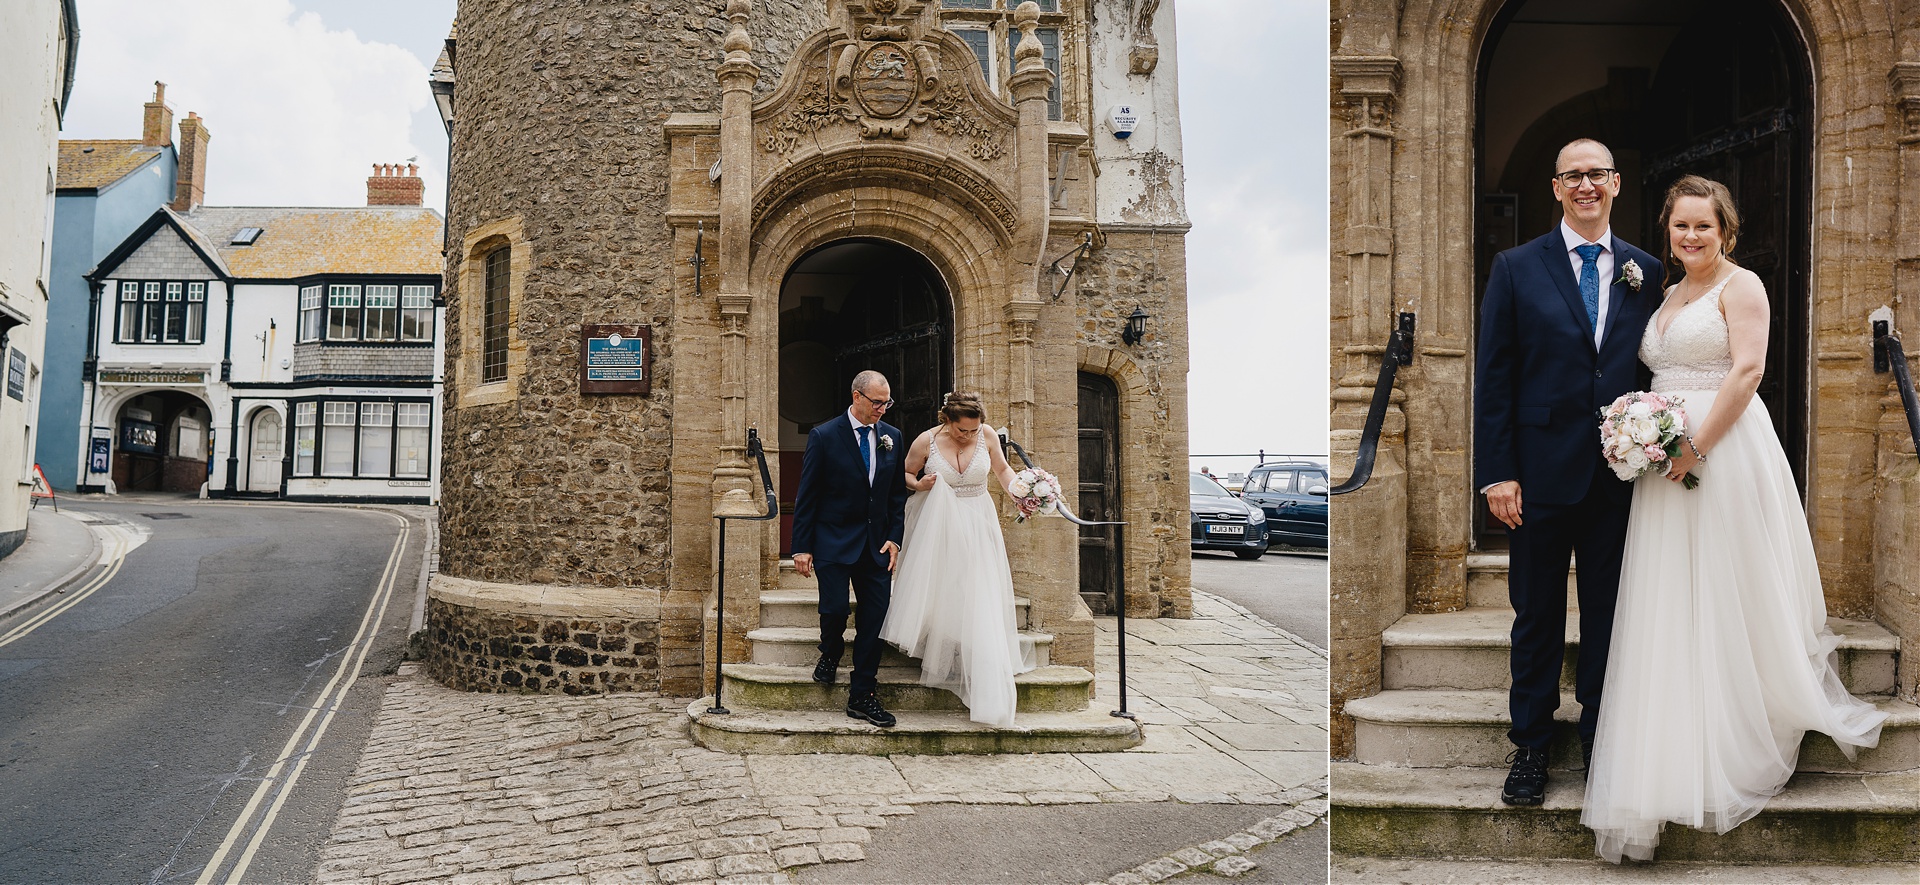 Bride and groom outside Lyme Regis Guildhall after elopement wedding by the sea